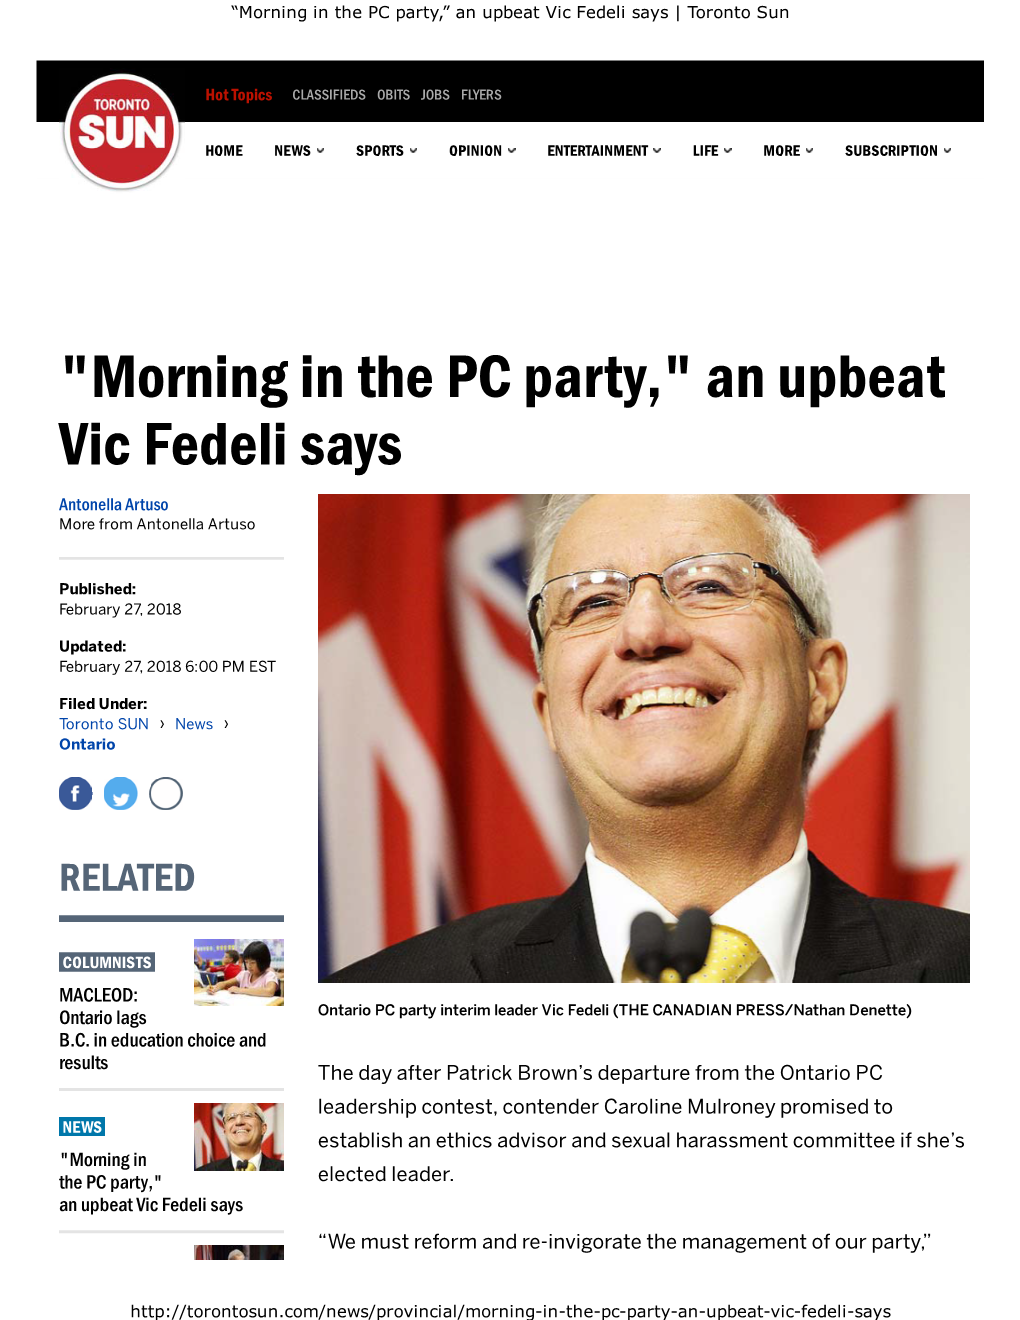 “Morning in the PC Party,” an Upbeat Vic Fedeli Says | Toronto Sun